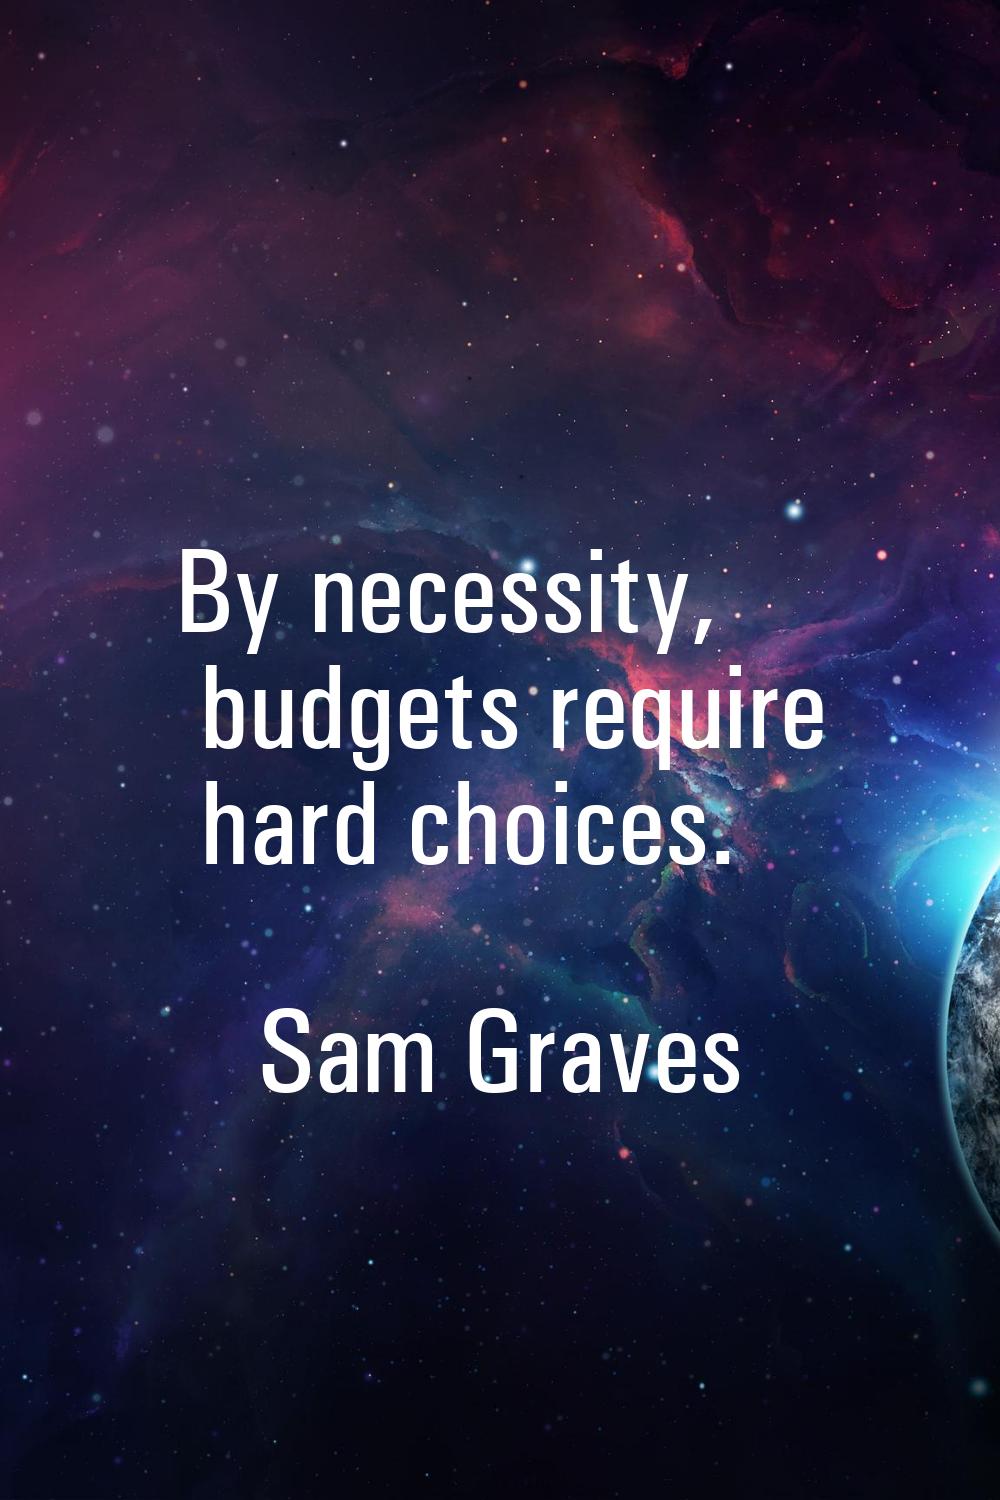 By necessity, budgets require hard choices.